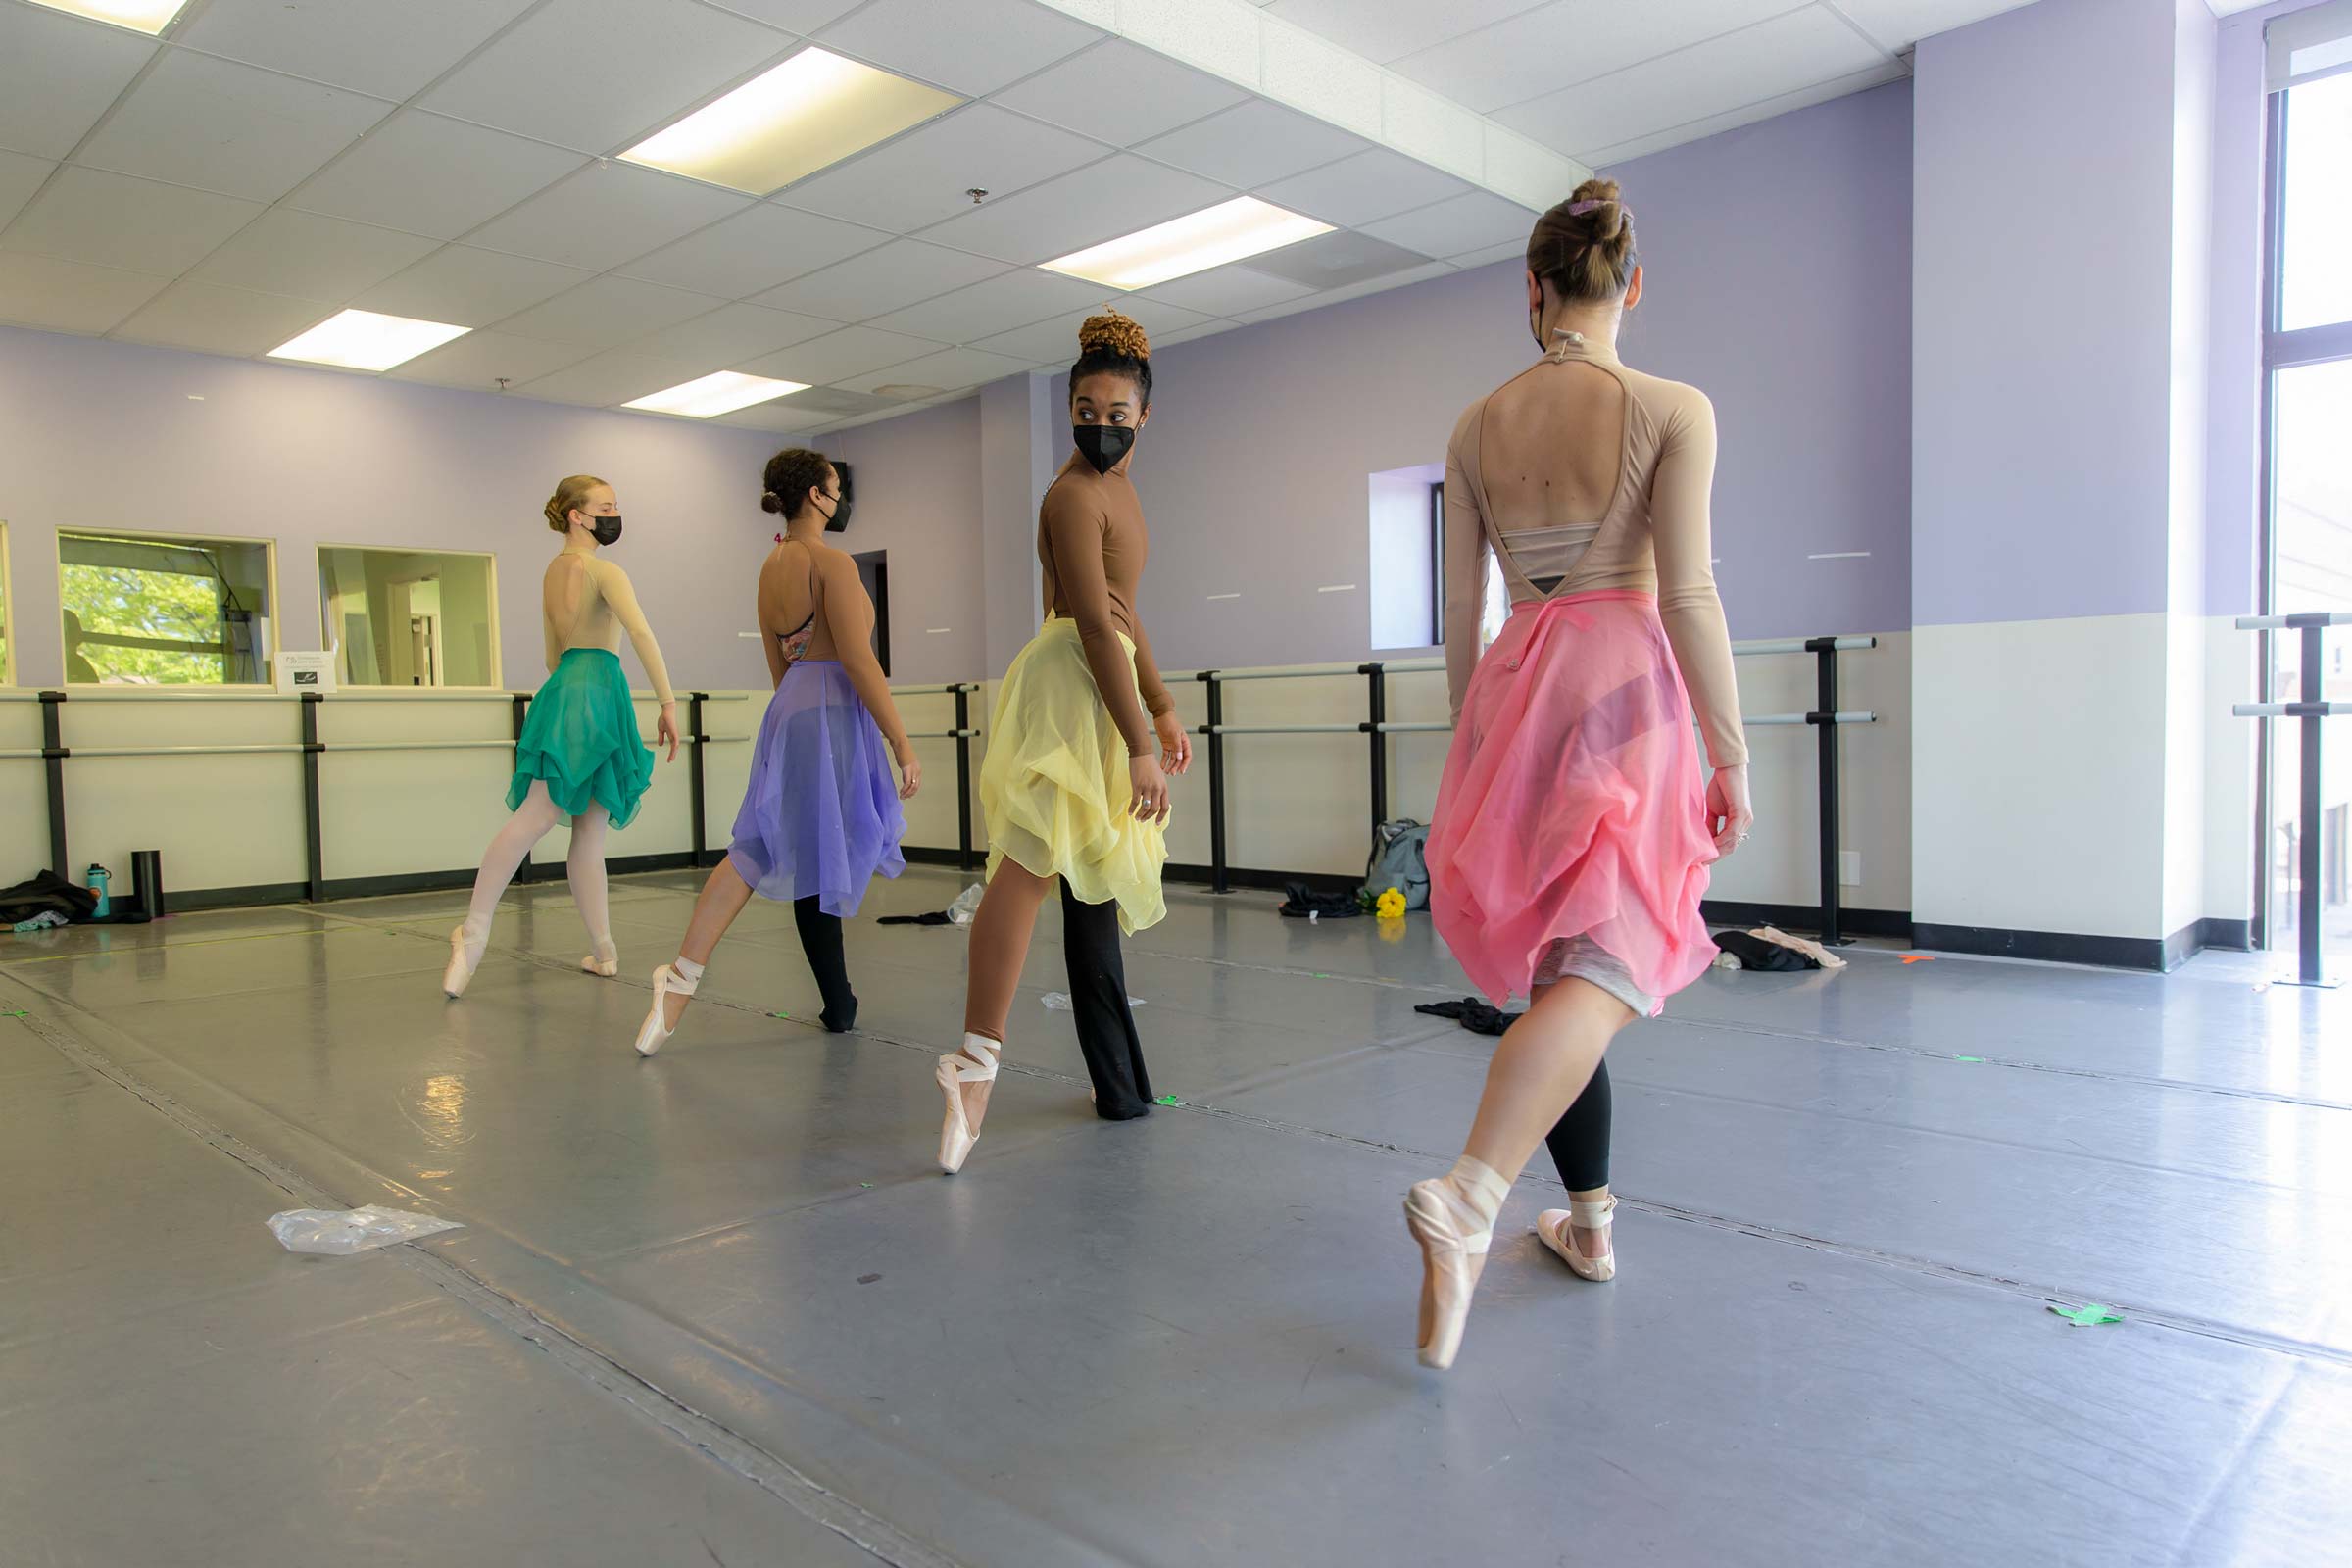 Four ballerinas in different colored skirts stand in a line, back toes pointed